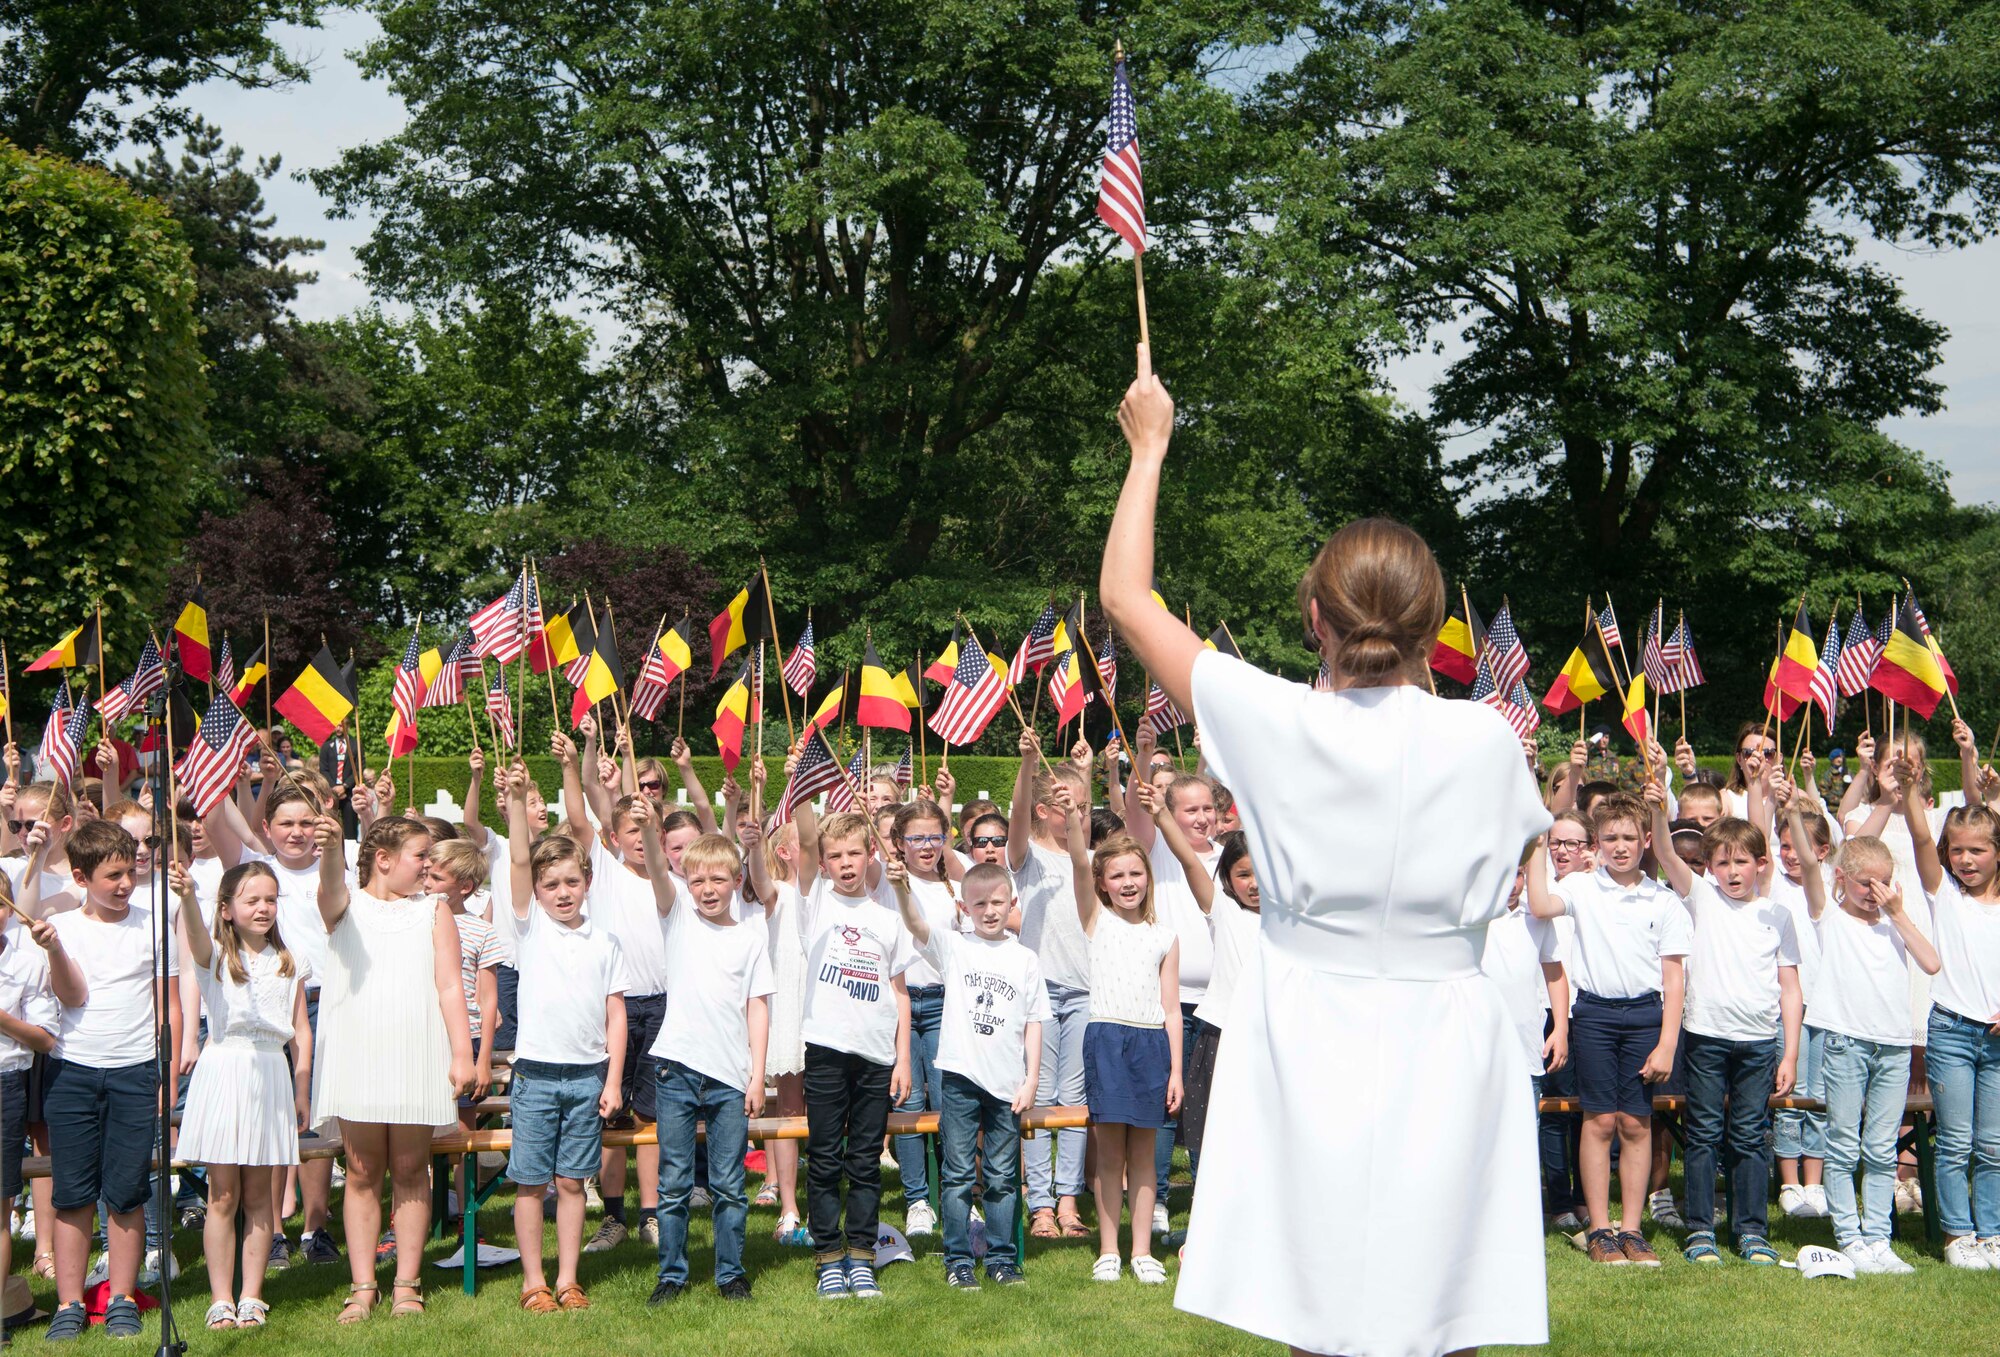 School children from the city of Waregem, sing the Star Spangled Banner at Flanders Field American Cemetery, Belgium, May 27, 2018. School children have sung the U.S. and Belgian national anthems at Flanders Field on Memorial Day every year since 1923. (U.S. Air Force photo by Senior Airman Elizabeth Baker)